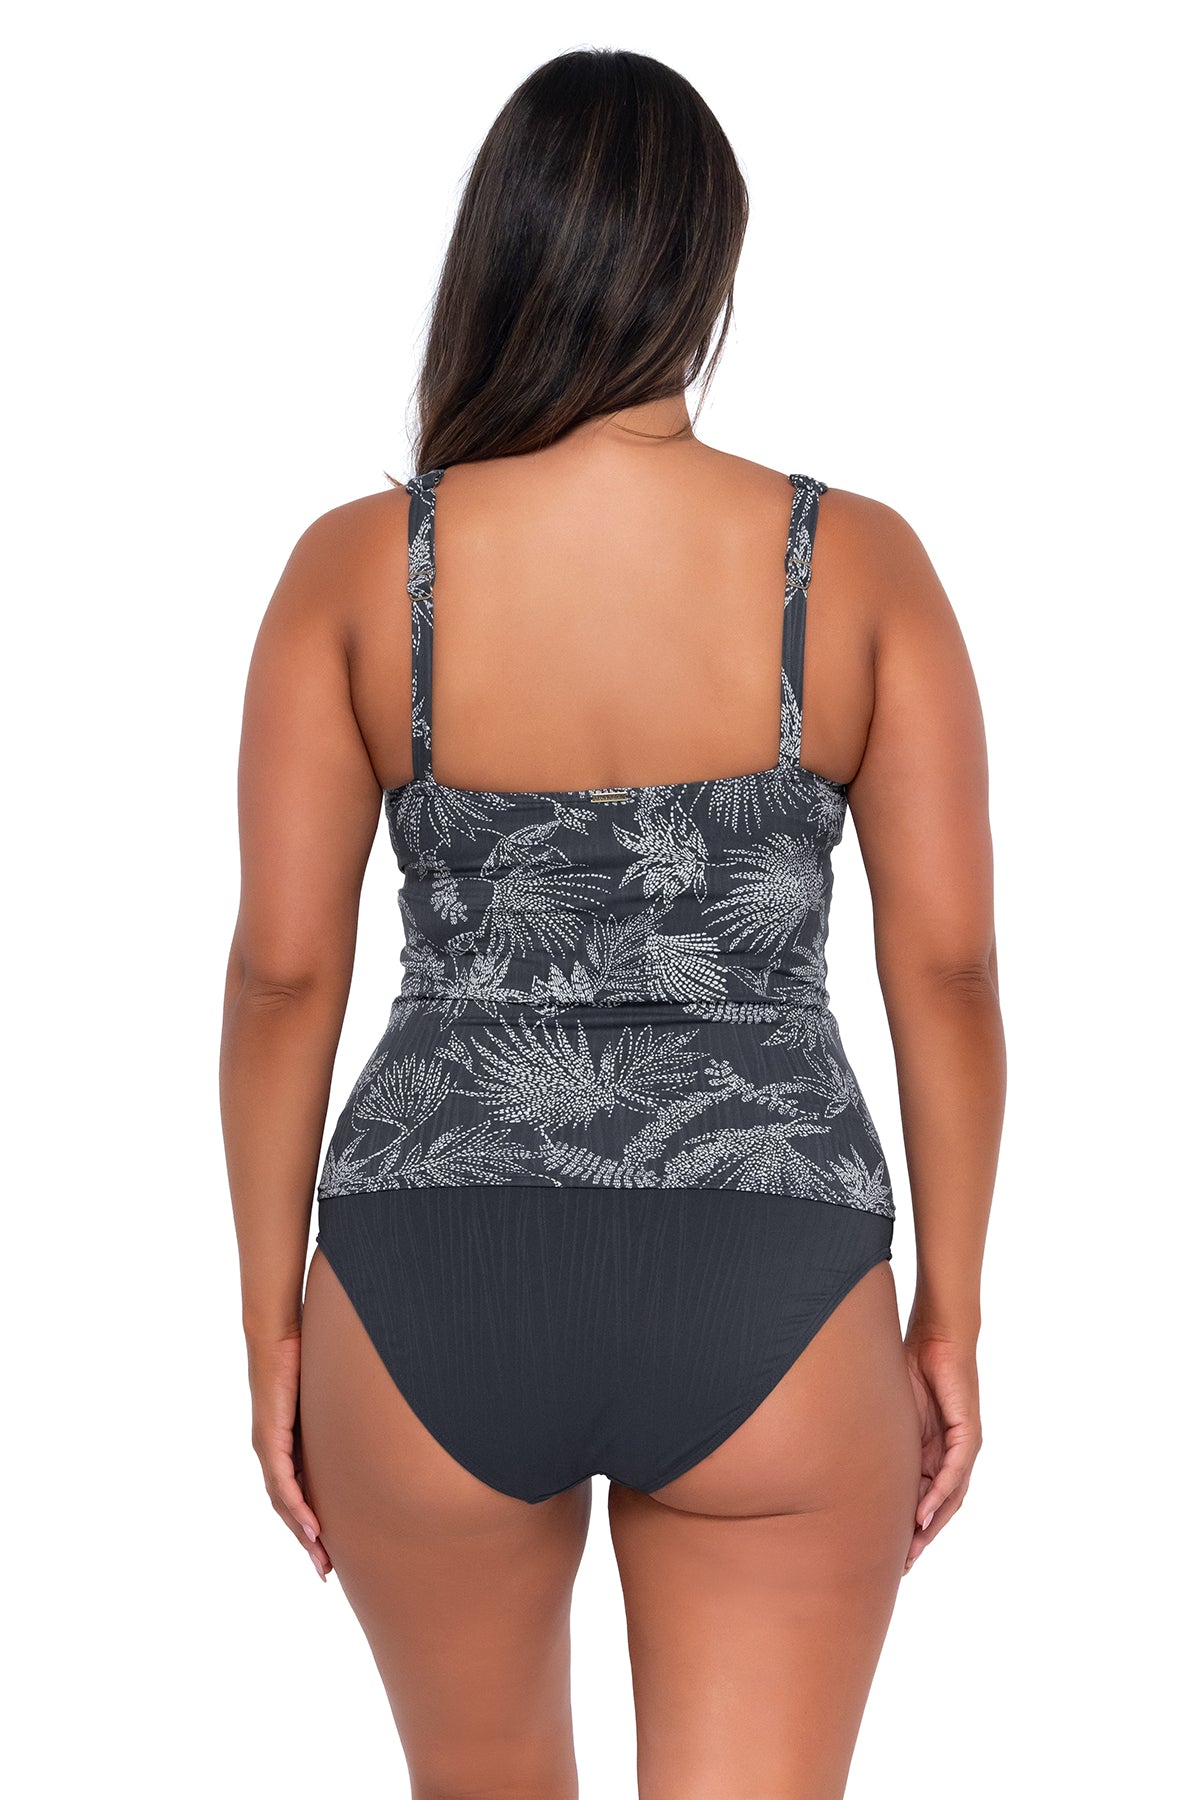 Back pose #1 of Nicky wearing Sunsets Fanfare Seagrass Texture Elsie Tankini Top with matching Hannah High Waist bikini bottom